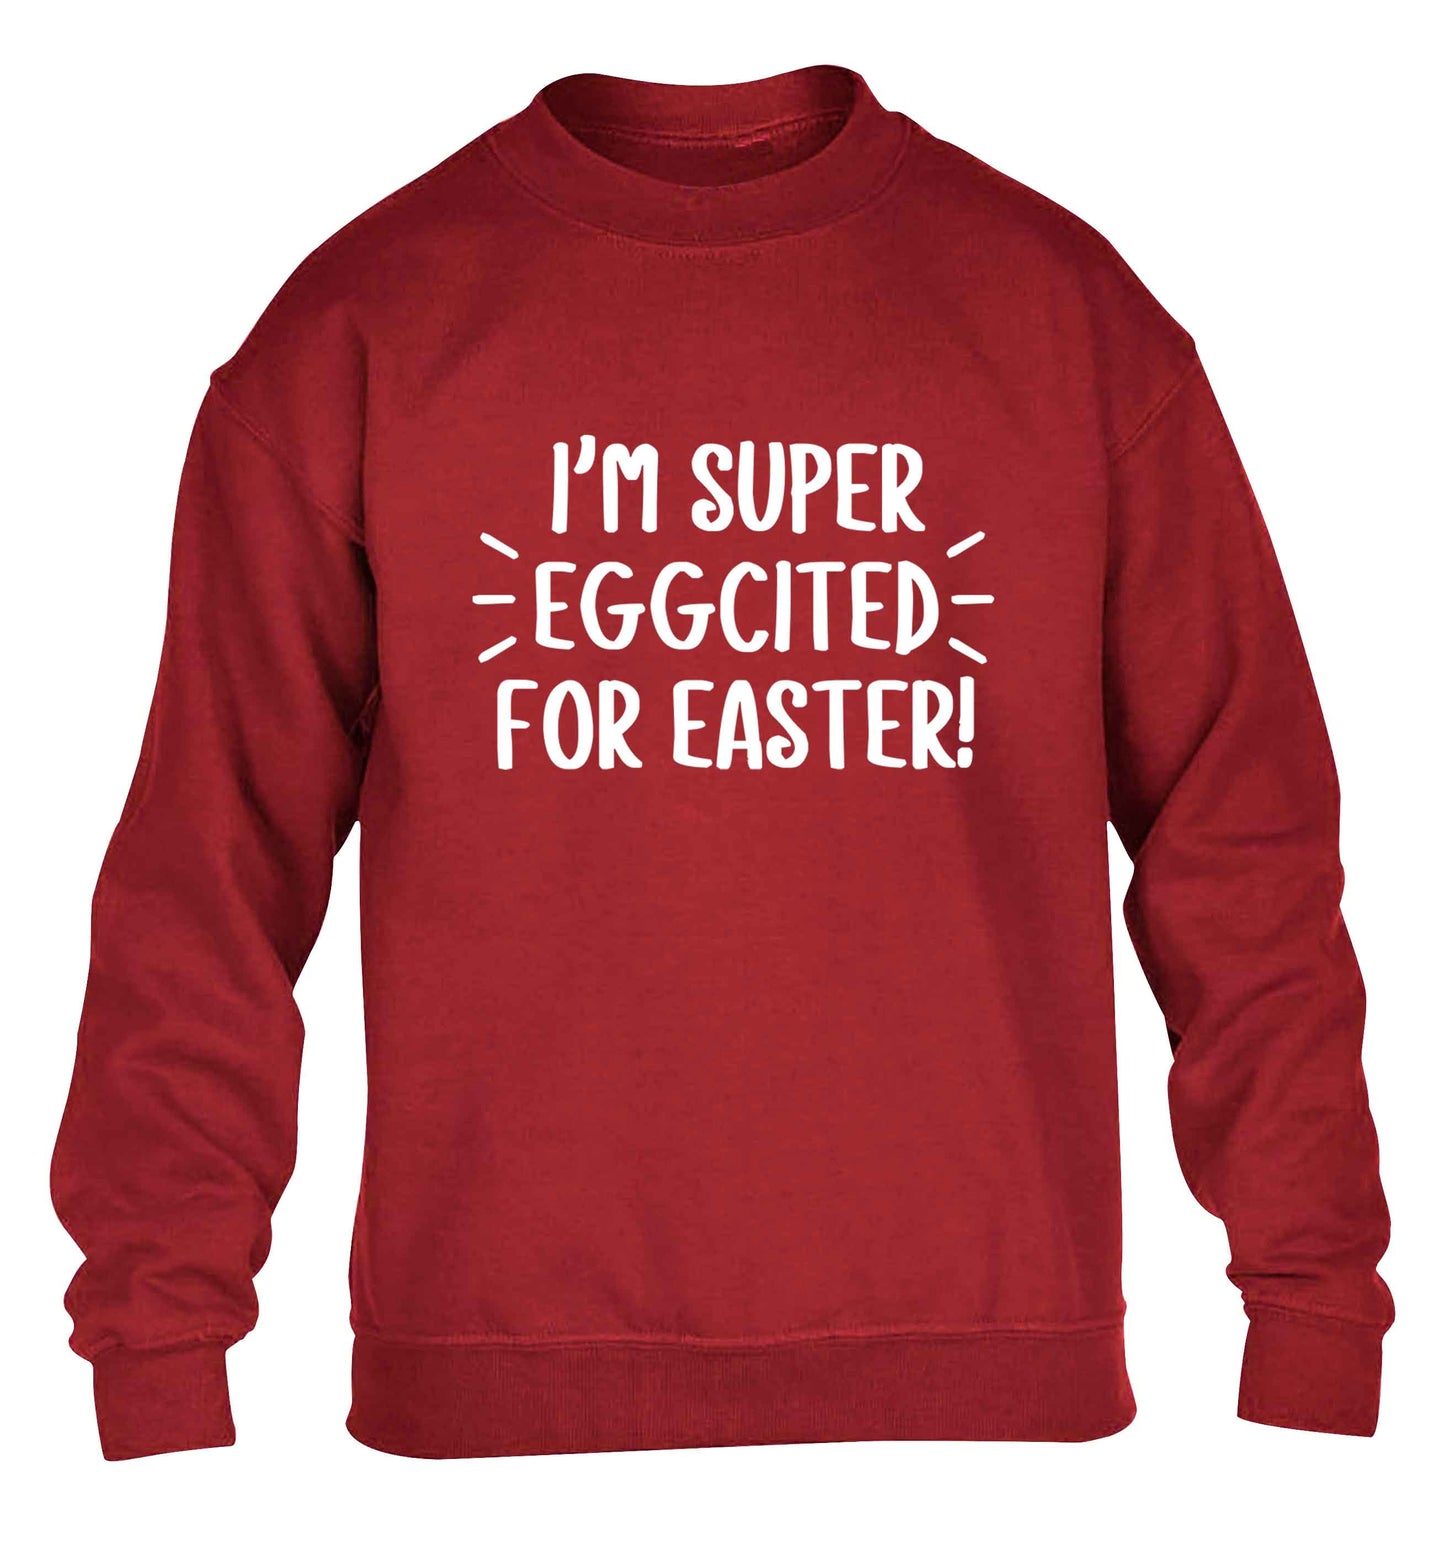 I'm super eggcited for Easter children's grey sweater 12-13 Years